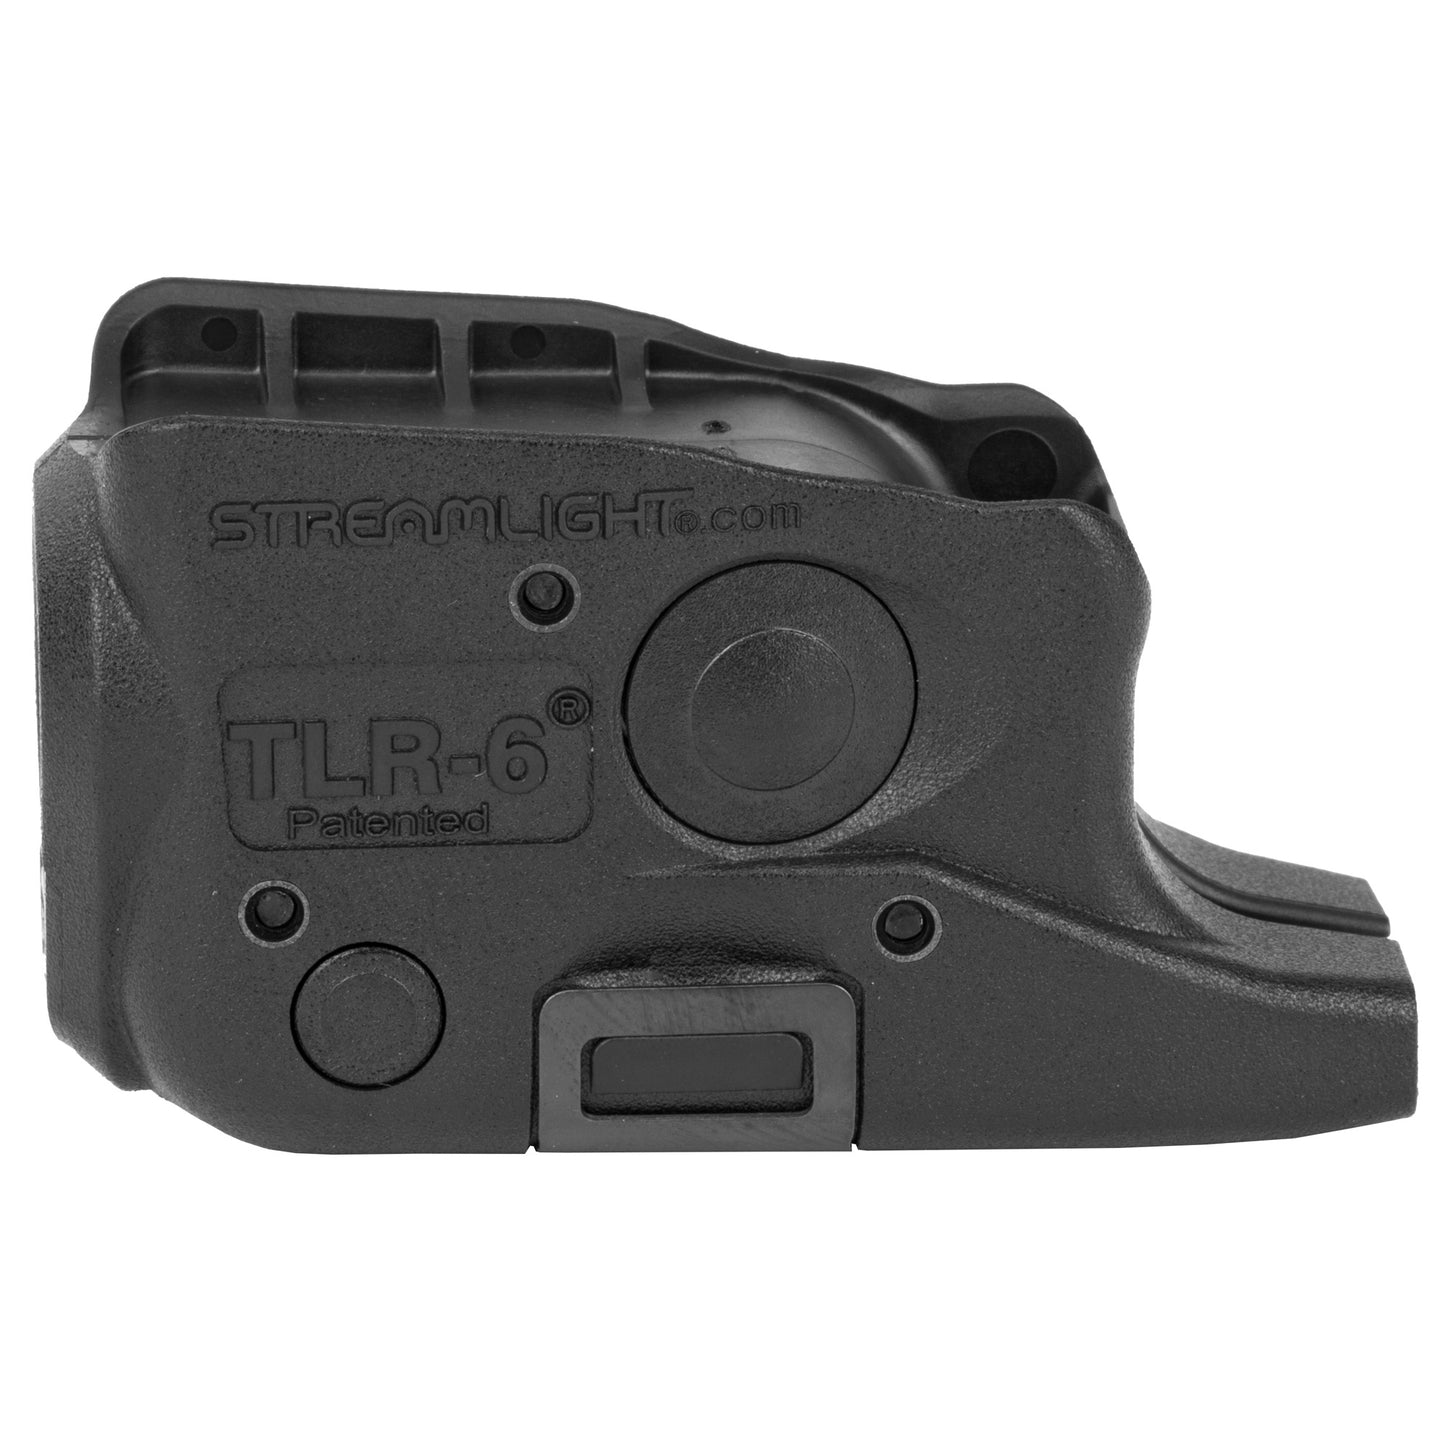 Streamlight, TLR-6, Weaponlight, Fits Glk 26/27/33, White LED 100 Lumens, Includes 2 CR 1/3N Lithium Batteries, Black